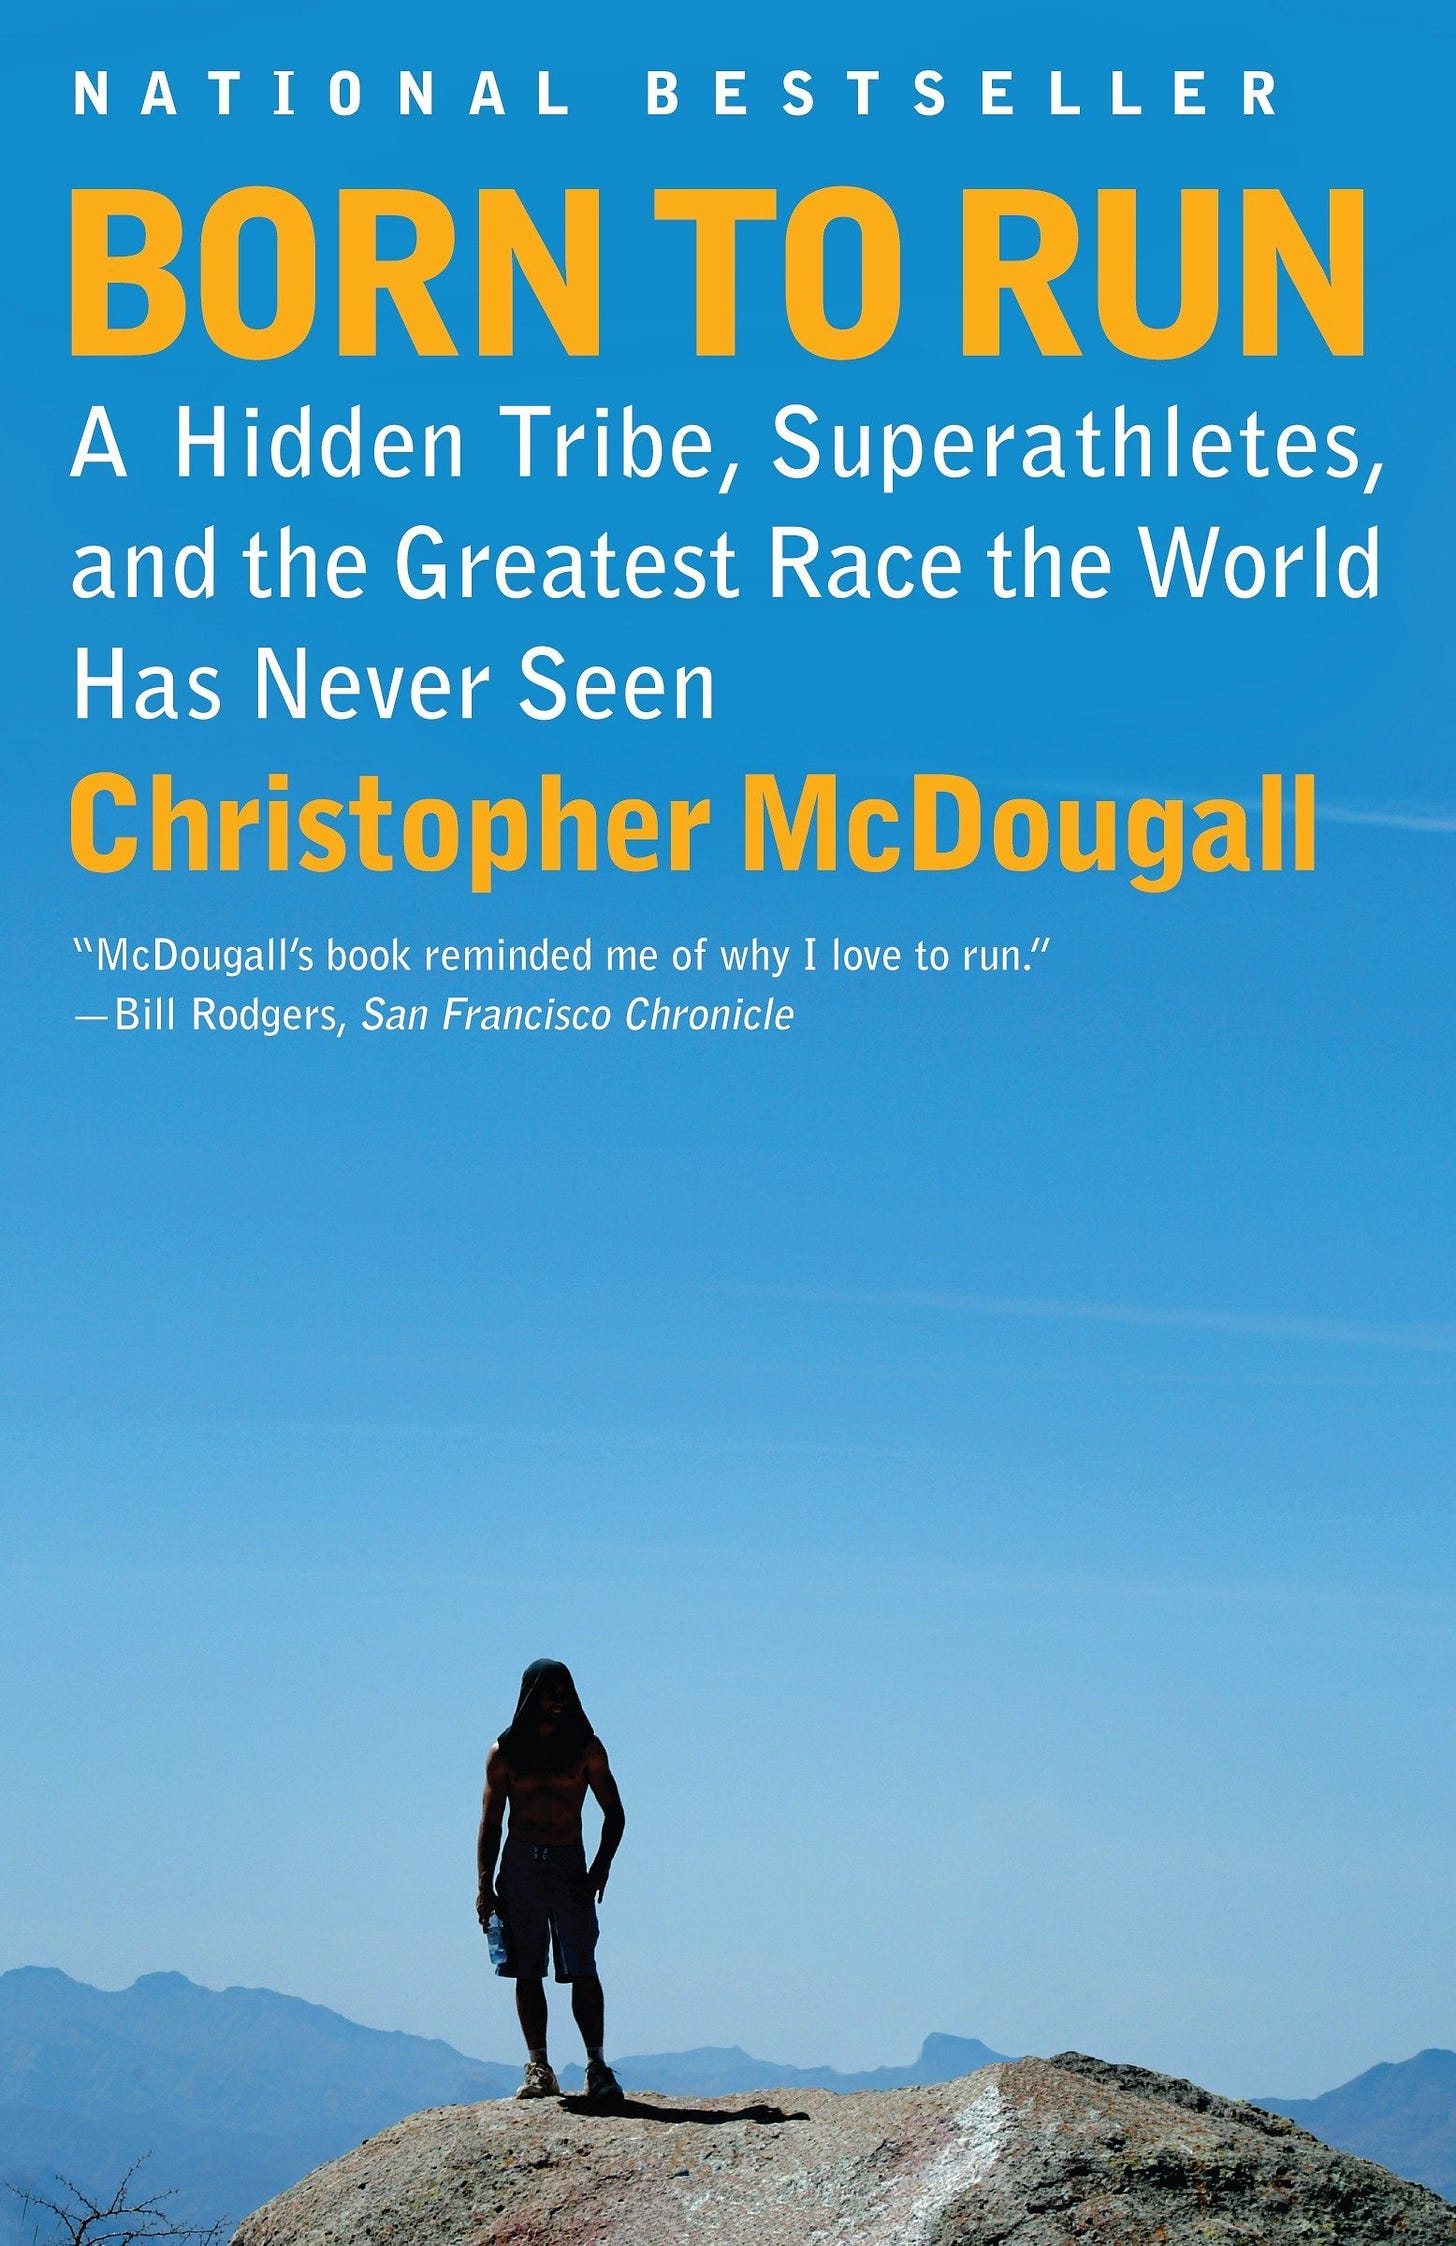 Born to Run: A Hidden Tribe, Superathletes, and the Greatest Race the World  Has Never Seen : McDougall, Christopher: Amazon.com.mx: Libros